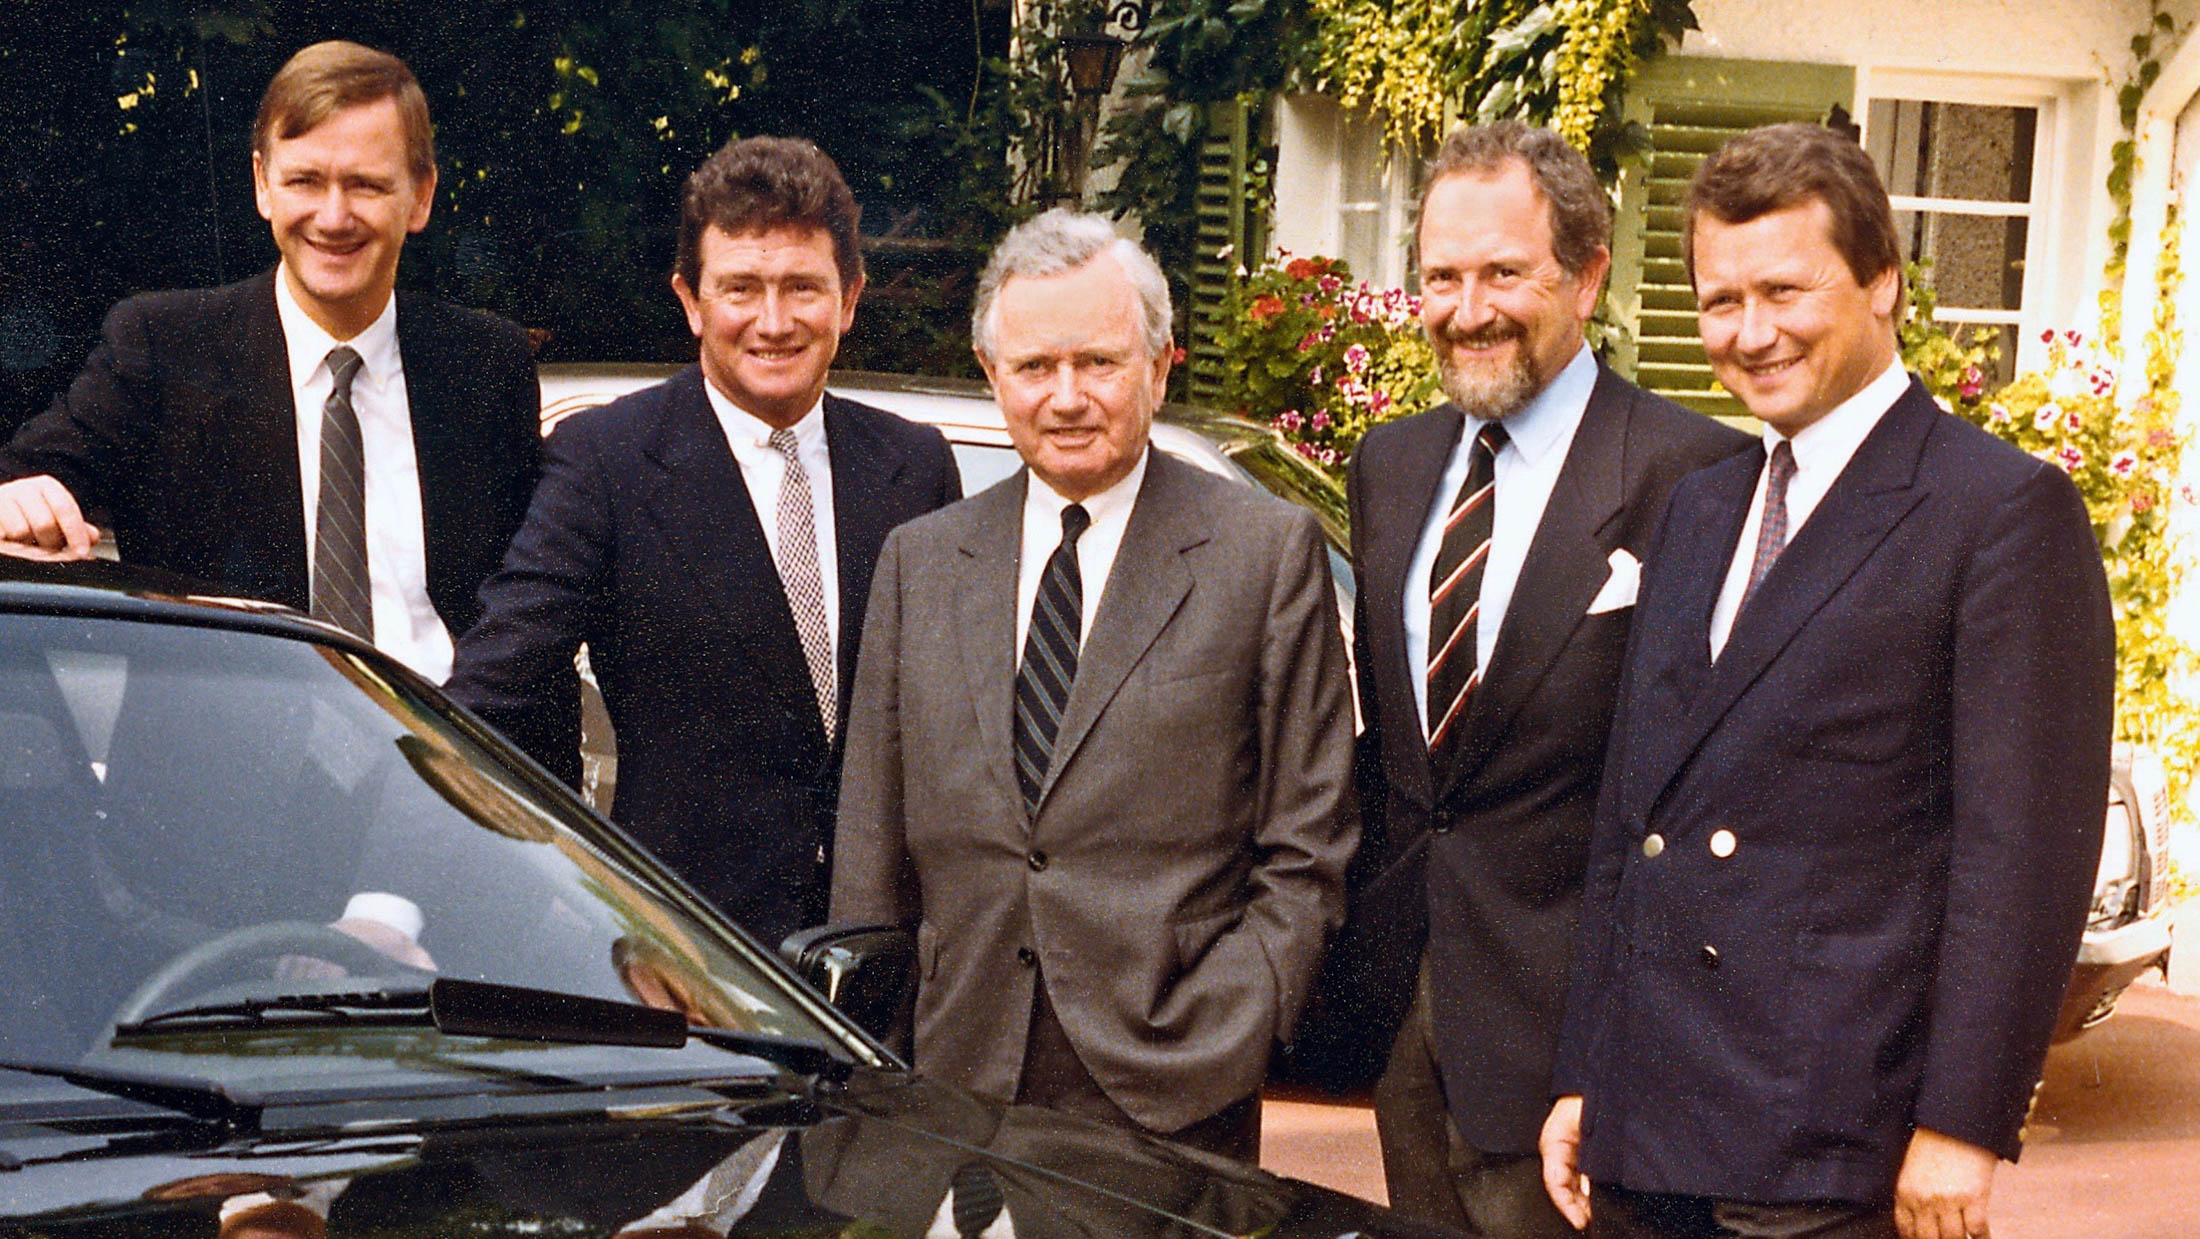 Wolfgang Porsche (right) celebrates&nbsp;the 75th&nbsp;birthday of his father&nbsp;Ferry (center)&nbsp;at the Porsche villa in Stuttgart in 1984, with brothers Hans-Peter (left), Gerhard (second from left), and Ferdinand Alexander.